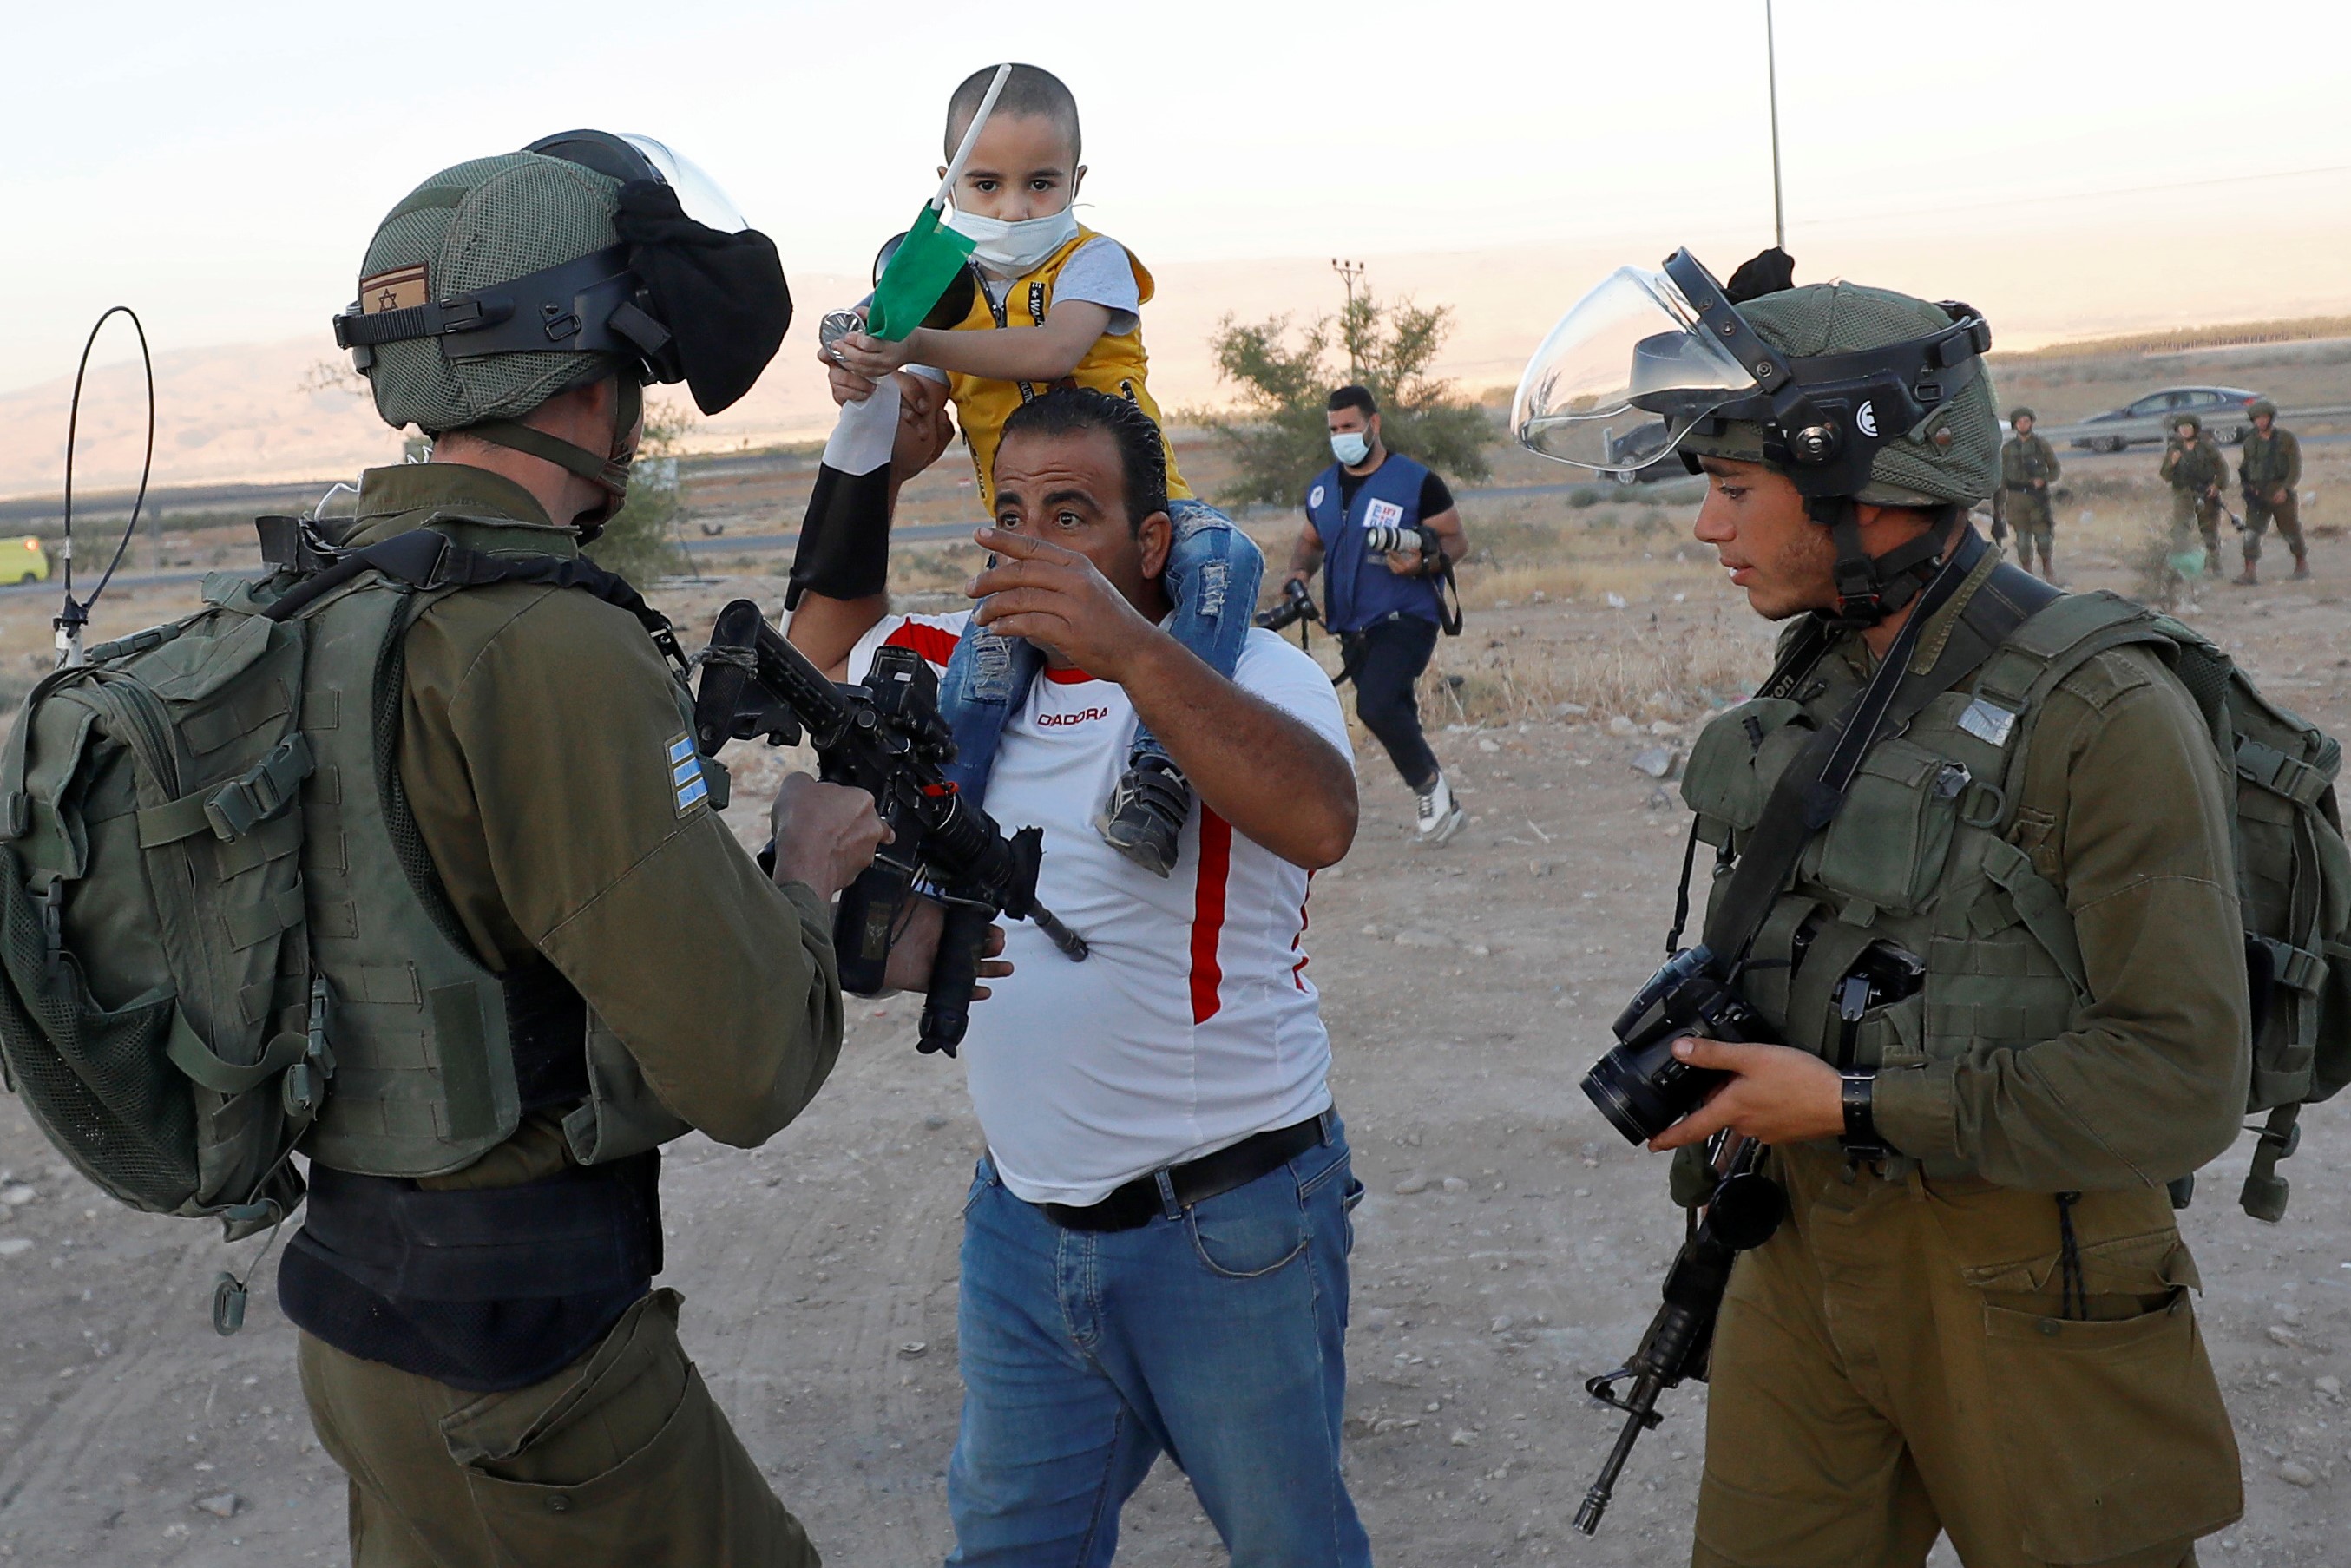 A Palestinian man carrying a chid as the Israeli soldier points the gun at him during a protest against Israel's plan to annex parts of the occupied West Bank, in Jordan Valley on 24  June (Reuters)